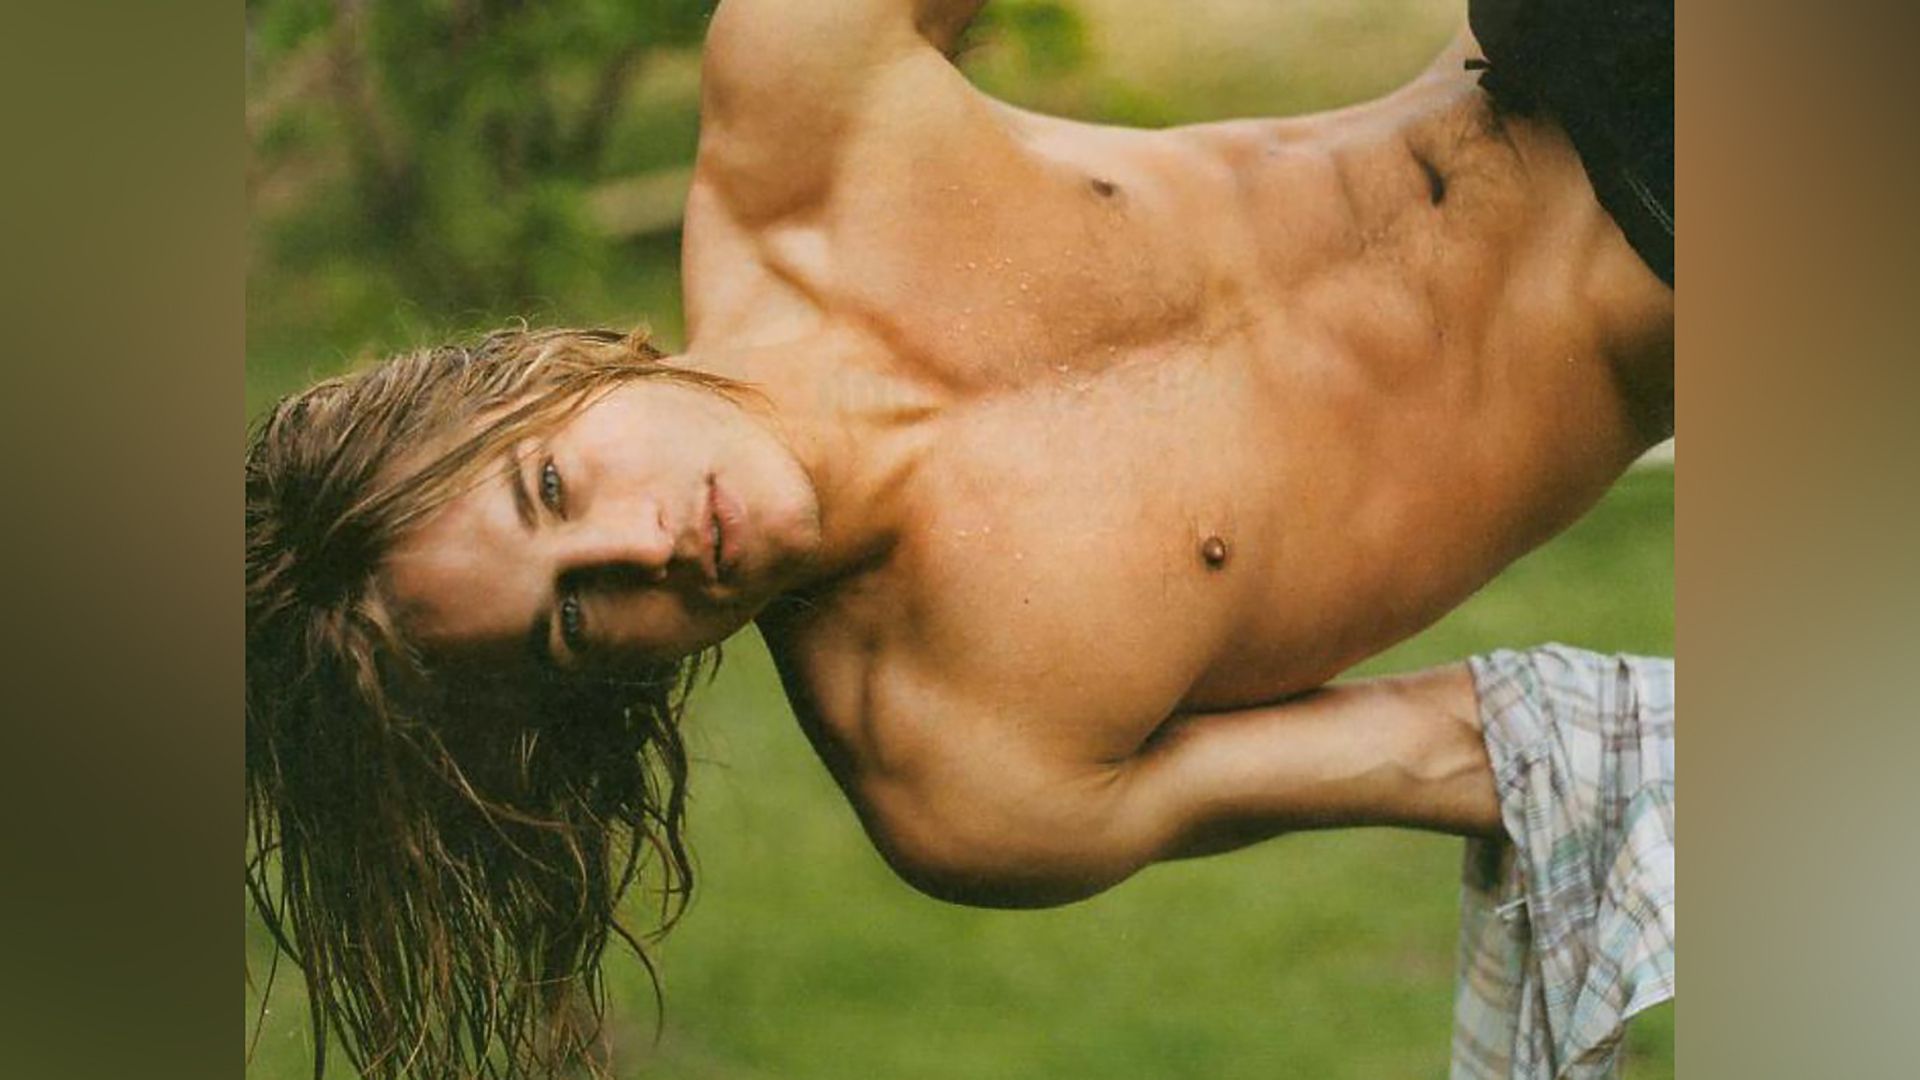 Travis Fimmel’s football career was ruined due to leg injury